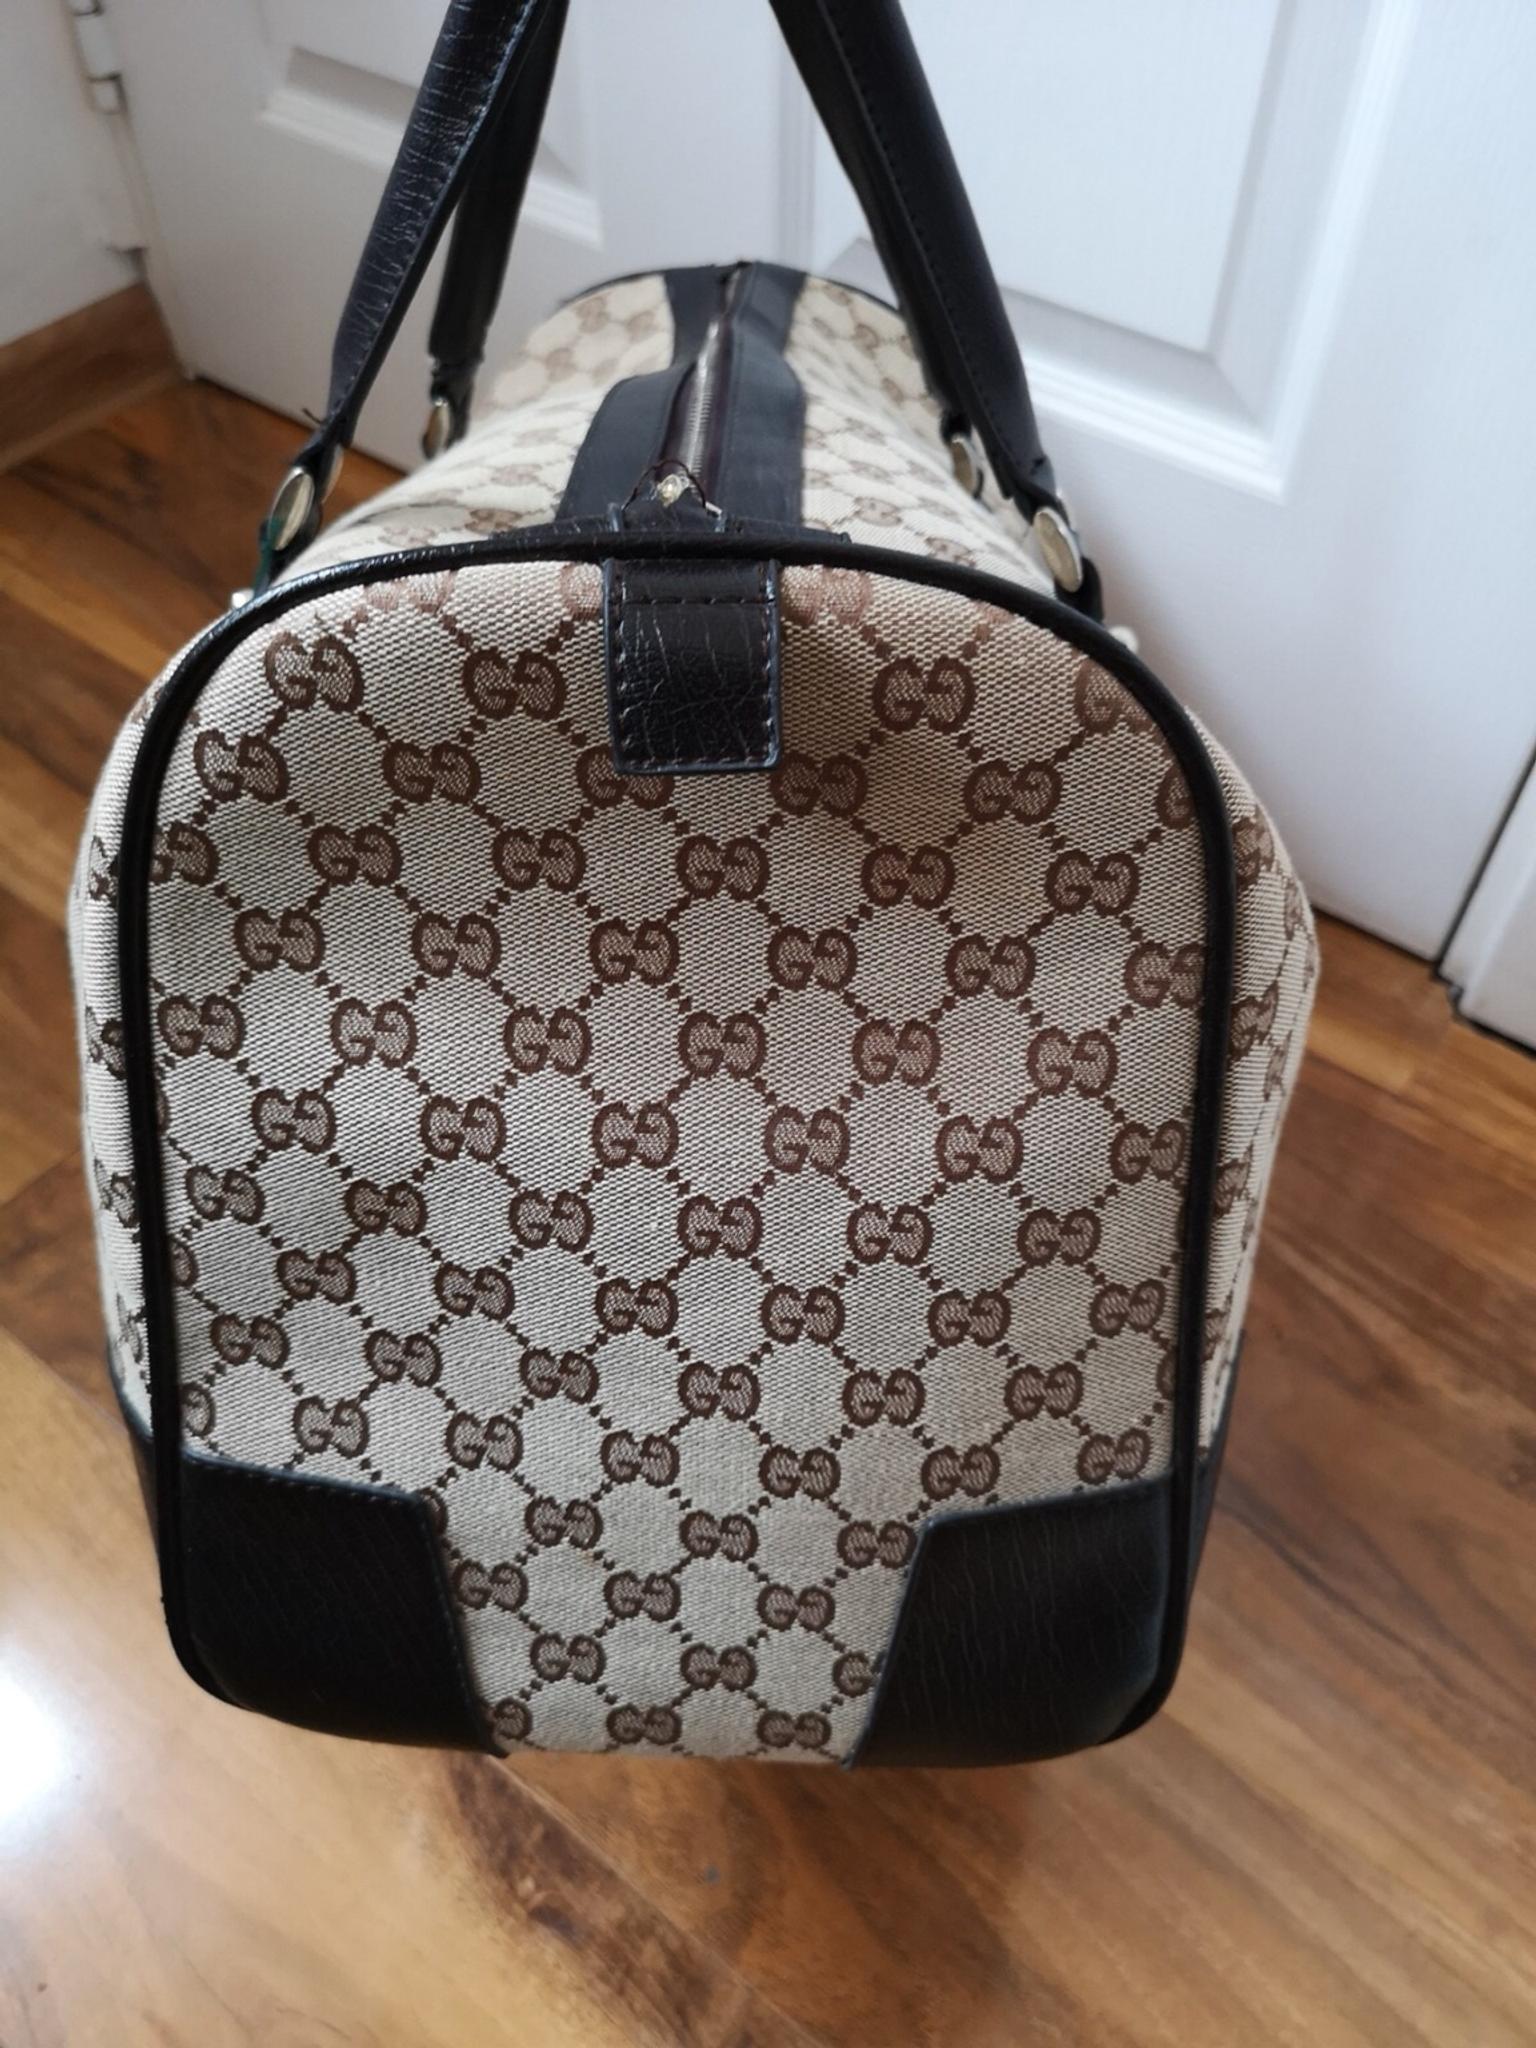 Gucci Classic monogram travel bag in B24 Birmingham for £100.00 for sale | Shpock